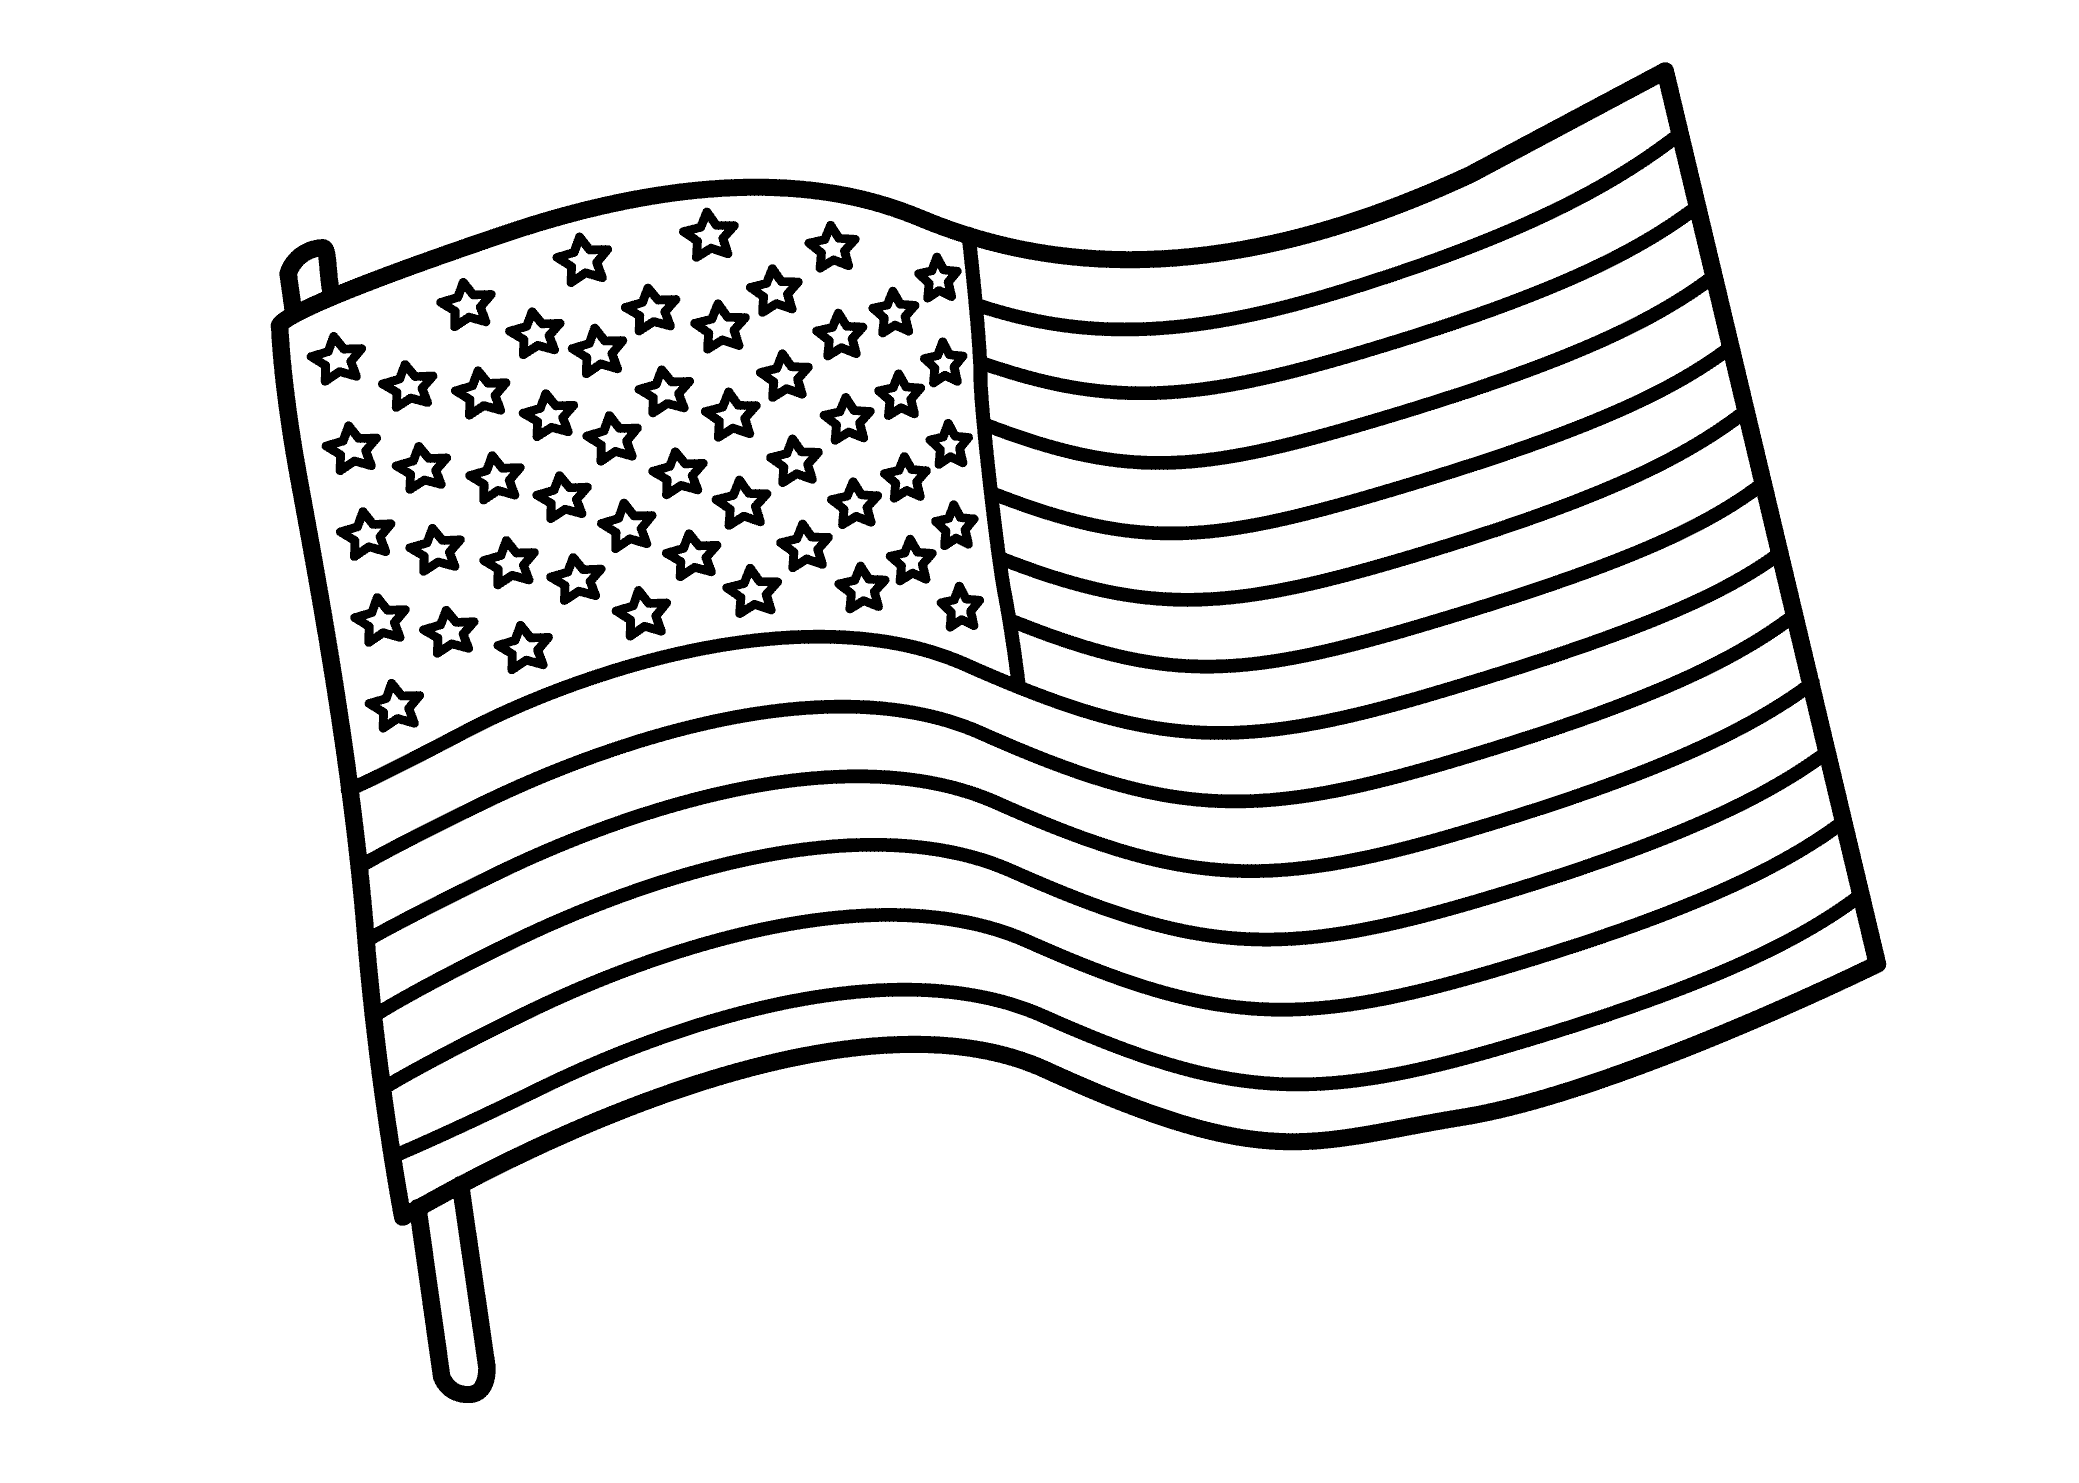 colouring pages us flag american flag coloring page for the love of the country flag us colouring pages 